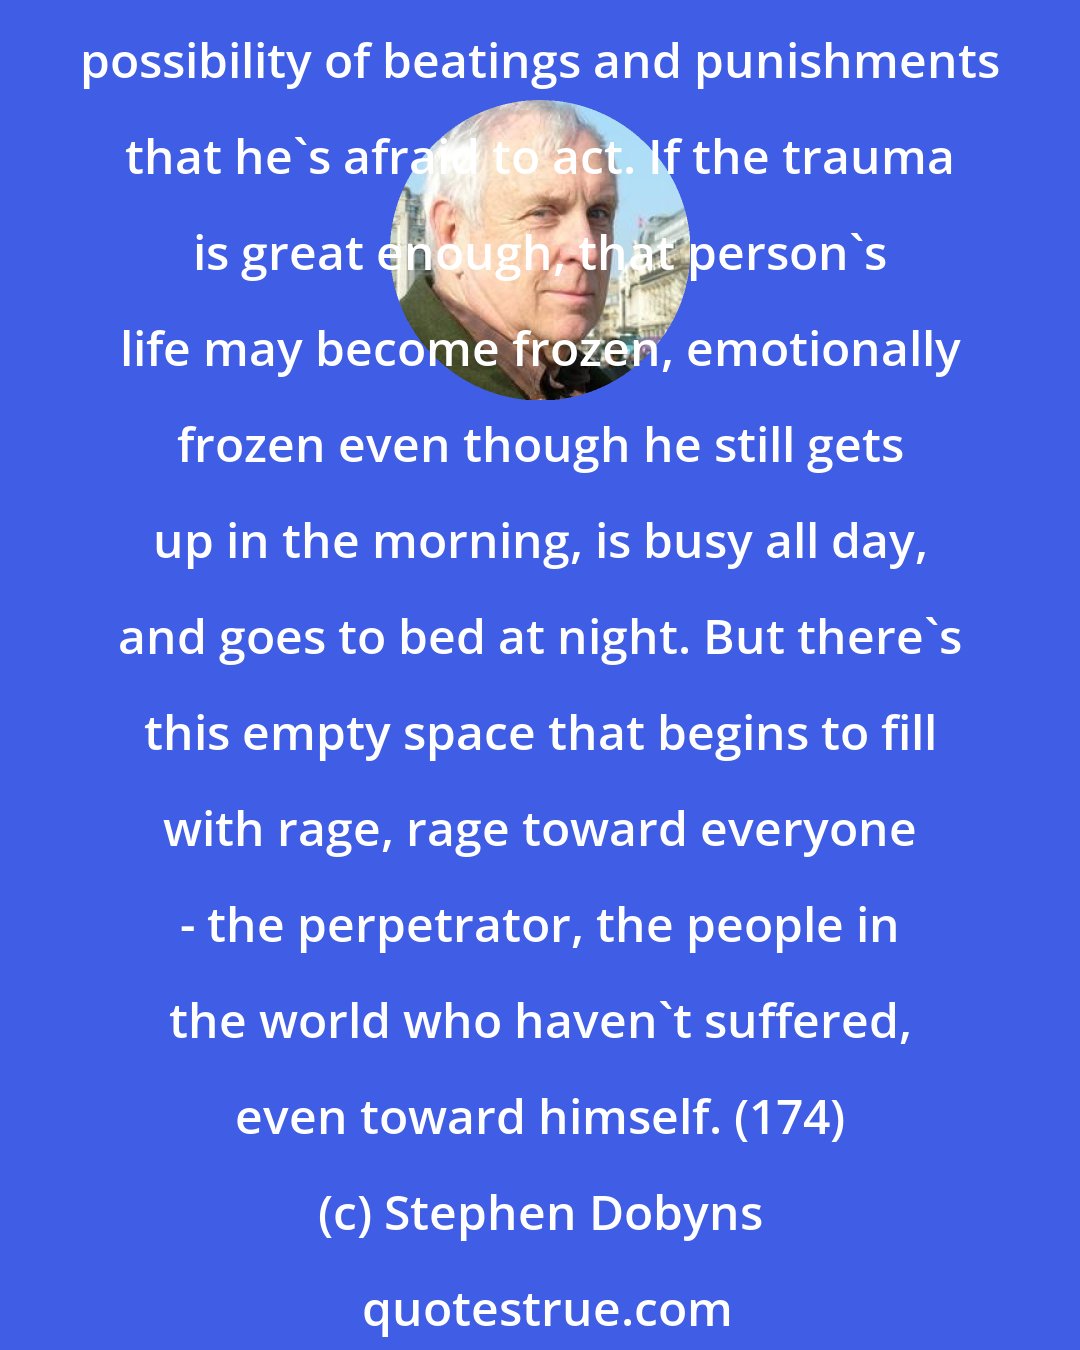 Stephen Dobyns: Let's say someone has experienced a violent trauma or betrayal: a child has been raped by a parent or has witnessed the destruction of someone he loves or has been so traumatized by the possibility of beatings and punishments that he's afraid to act. If the trauma is great enough, that person's life may become frozen, emotionally frozen even though he still gets up in the morning, is busy all day, and goes to bed at night. But there's this empty space that begins to fill with rage, rage toward everyone - the perpetrator, the people in the world who haven't suffered, even toward himself. (174)